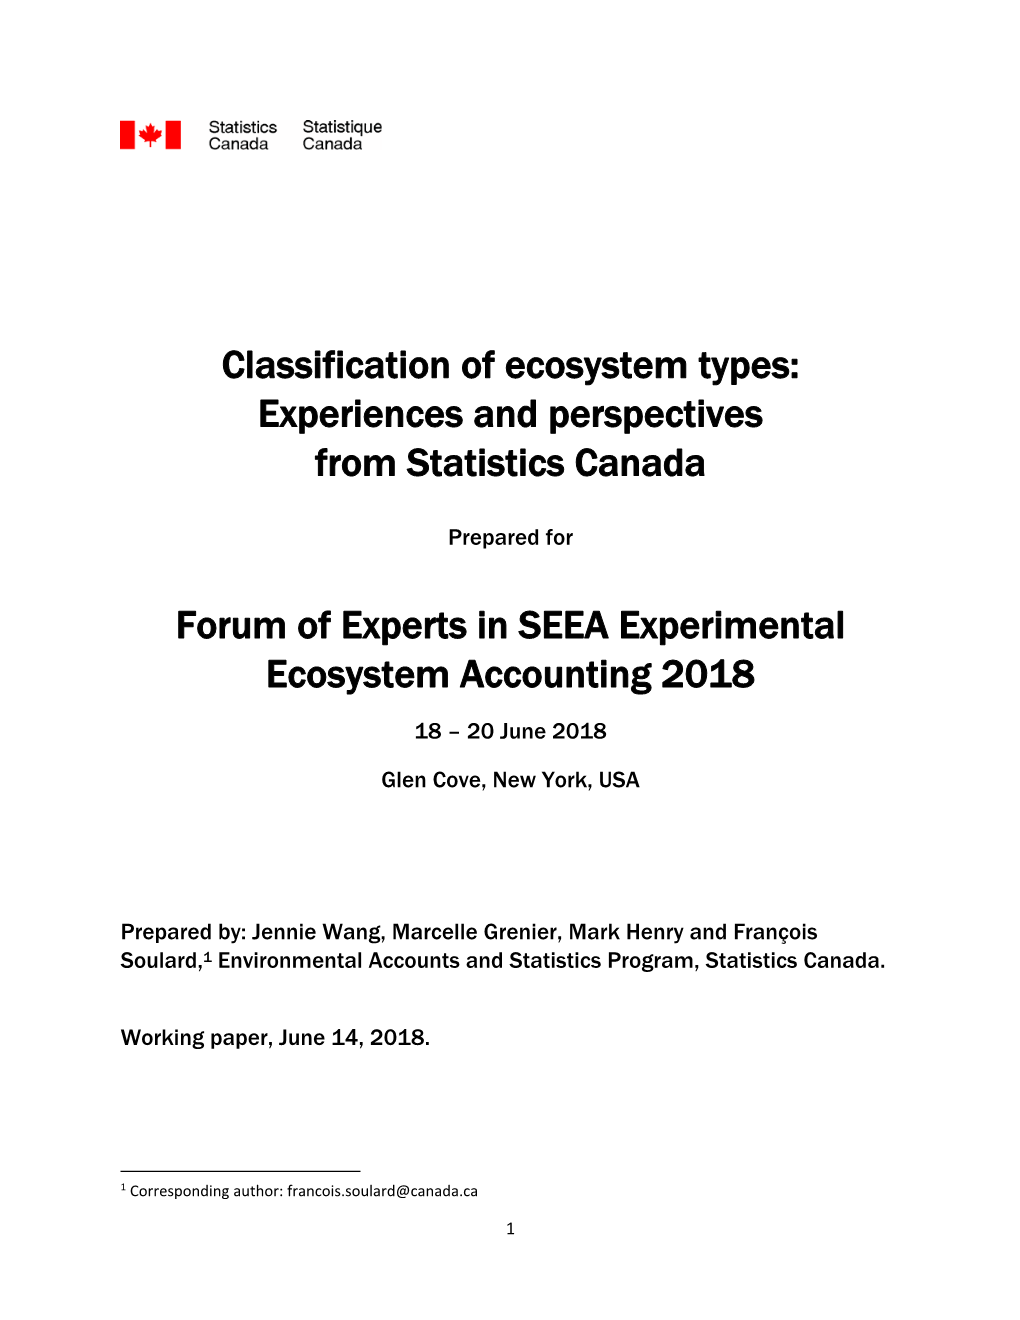 Classification of Ecosystem Types: Experiences and Perspectives from Statistics Canada